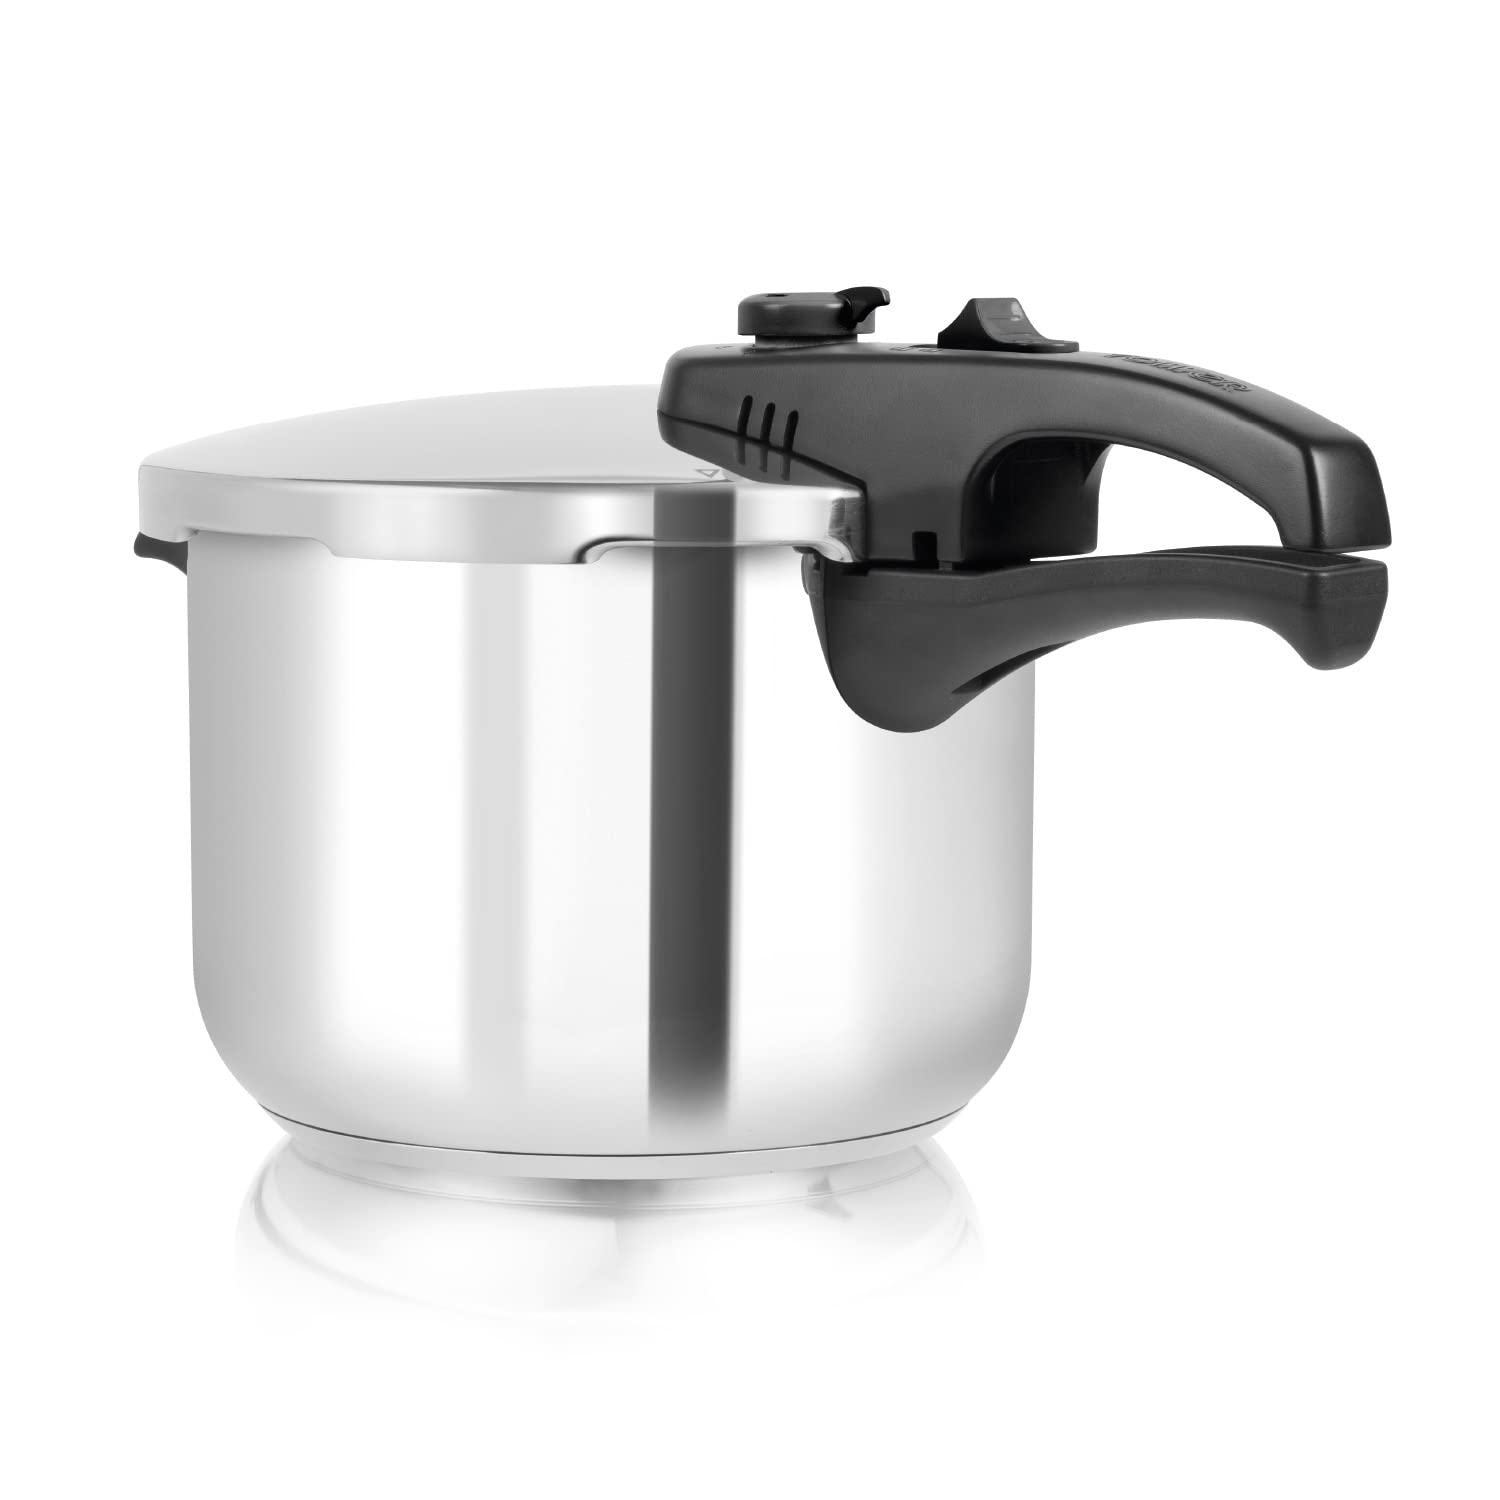 Tower T80244 Pressure Cooker